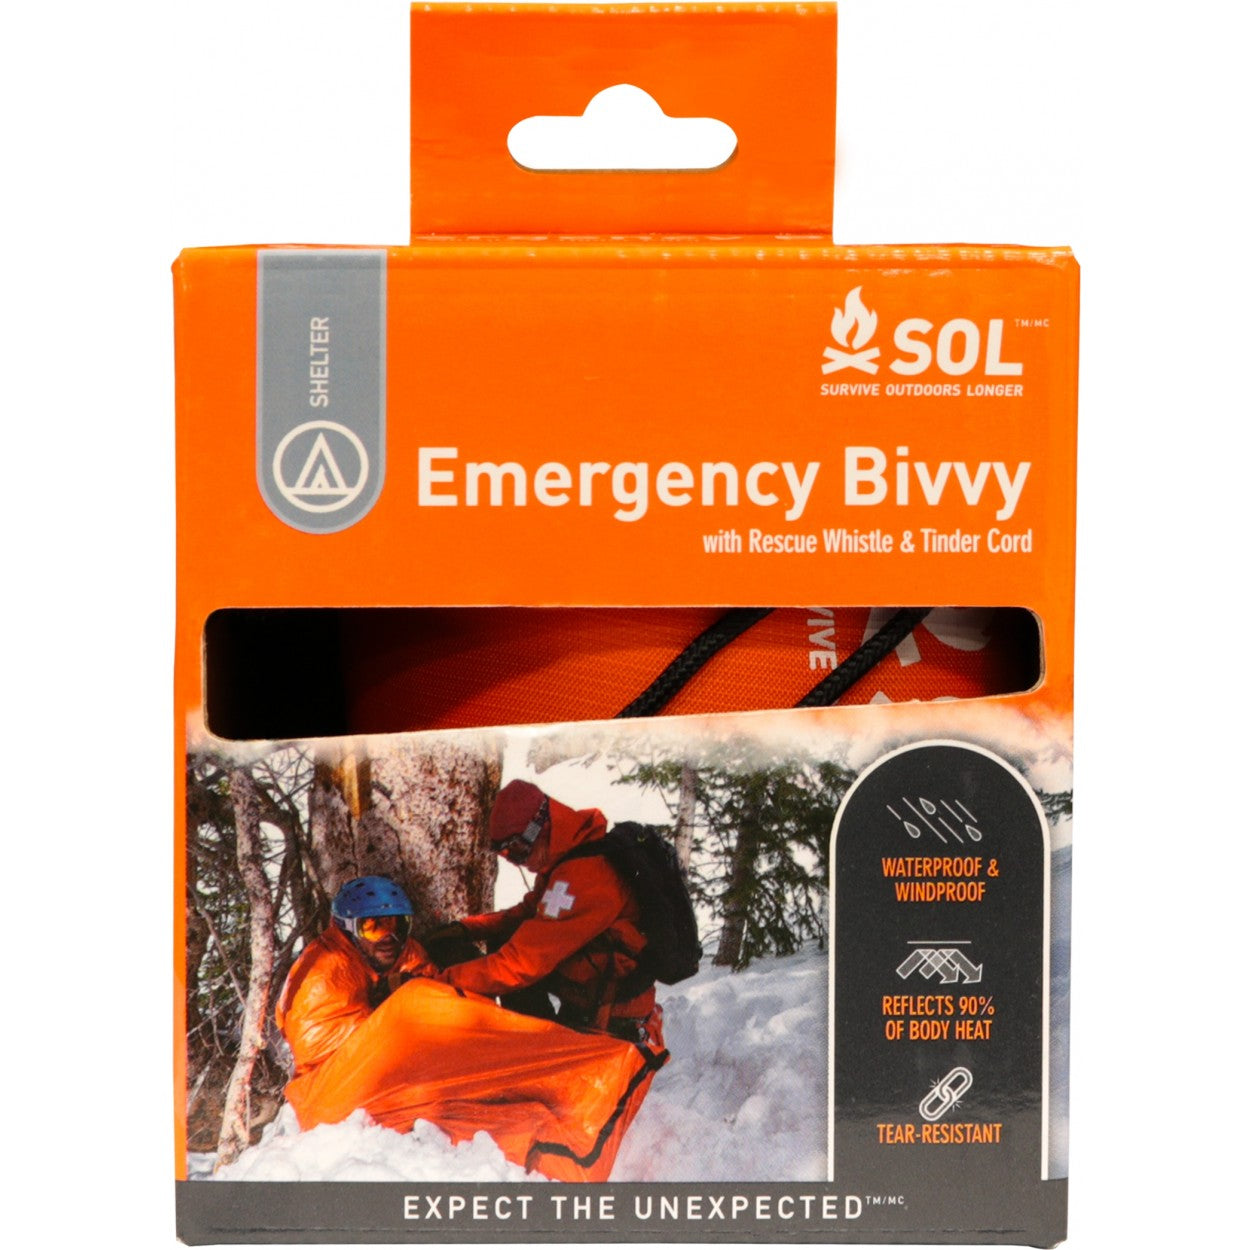 SOL Emergency Bivvy - Survival Orange -  - Mansfield Hunting & Fishing - Products to prepare for Corona Virus